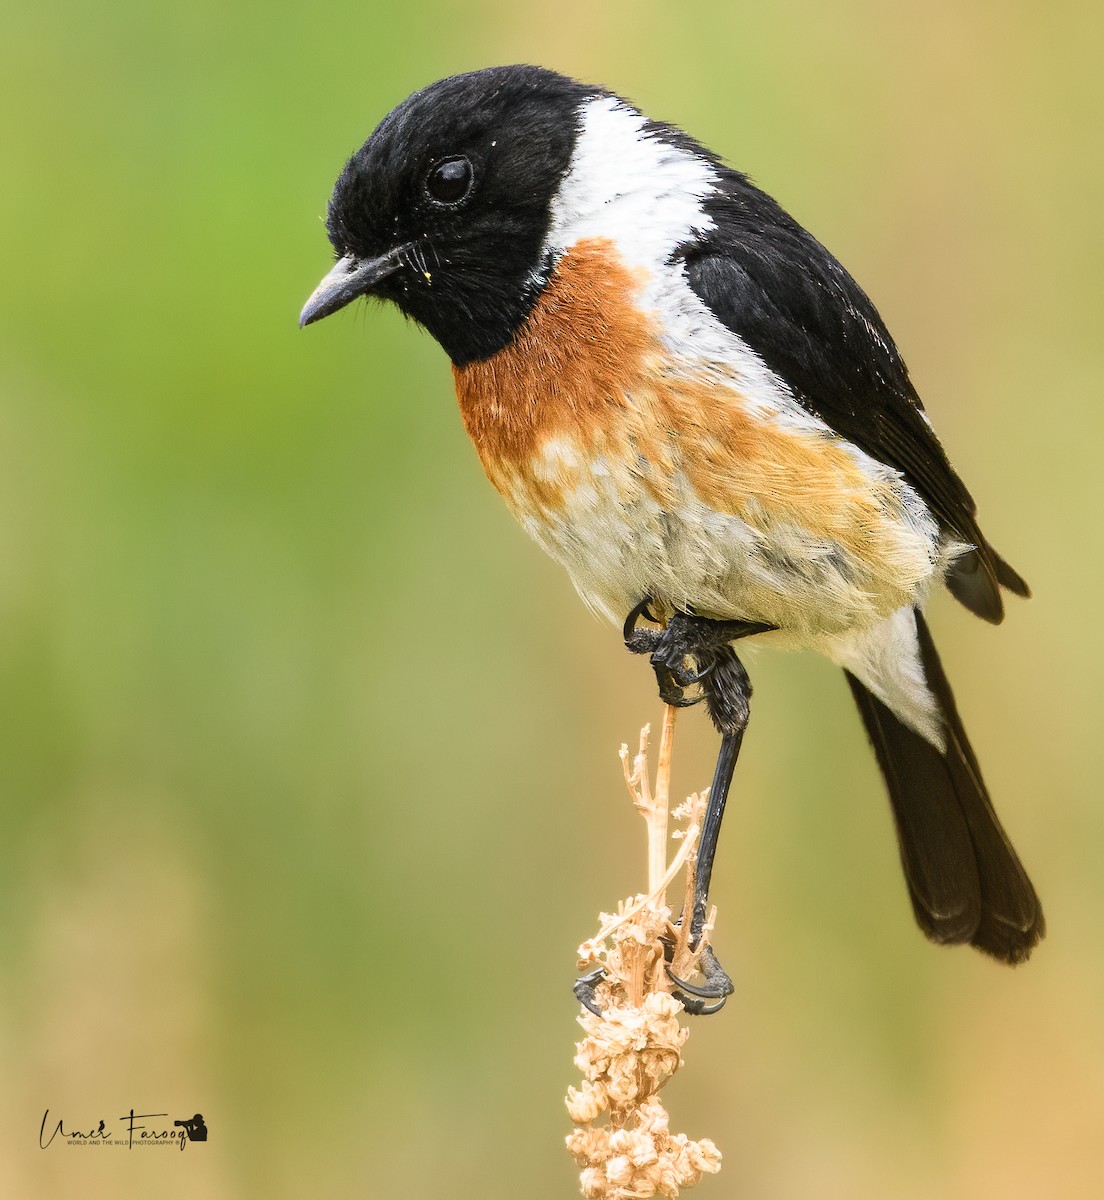 African Stonechat - Umer Farooq(World and the Wild Team)